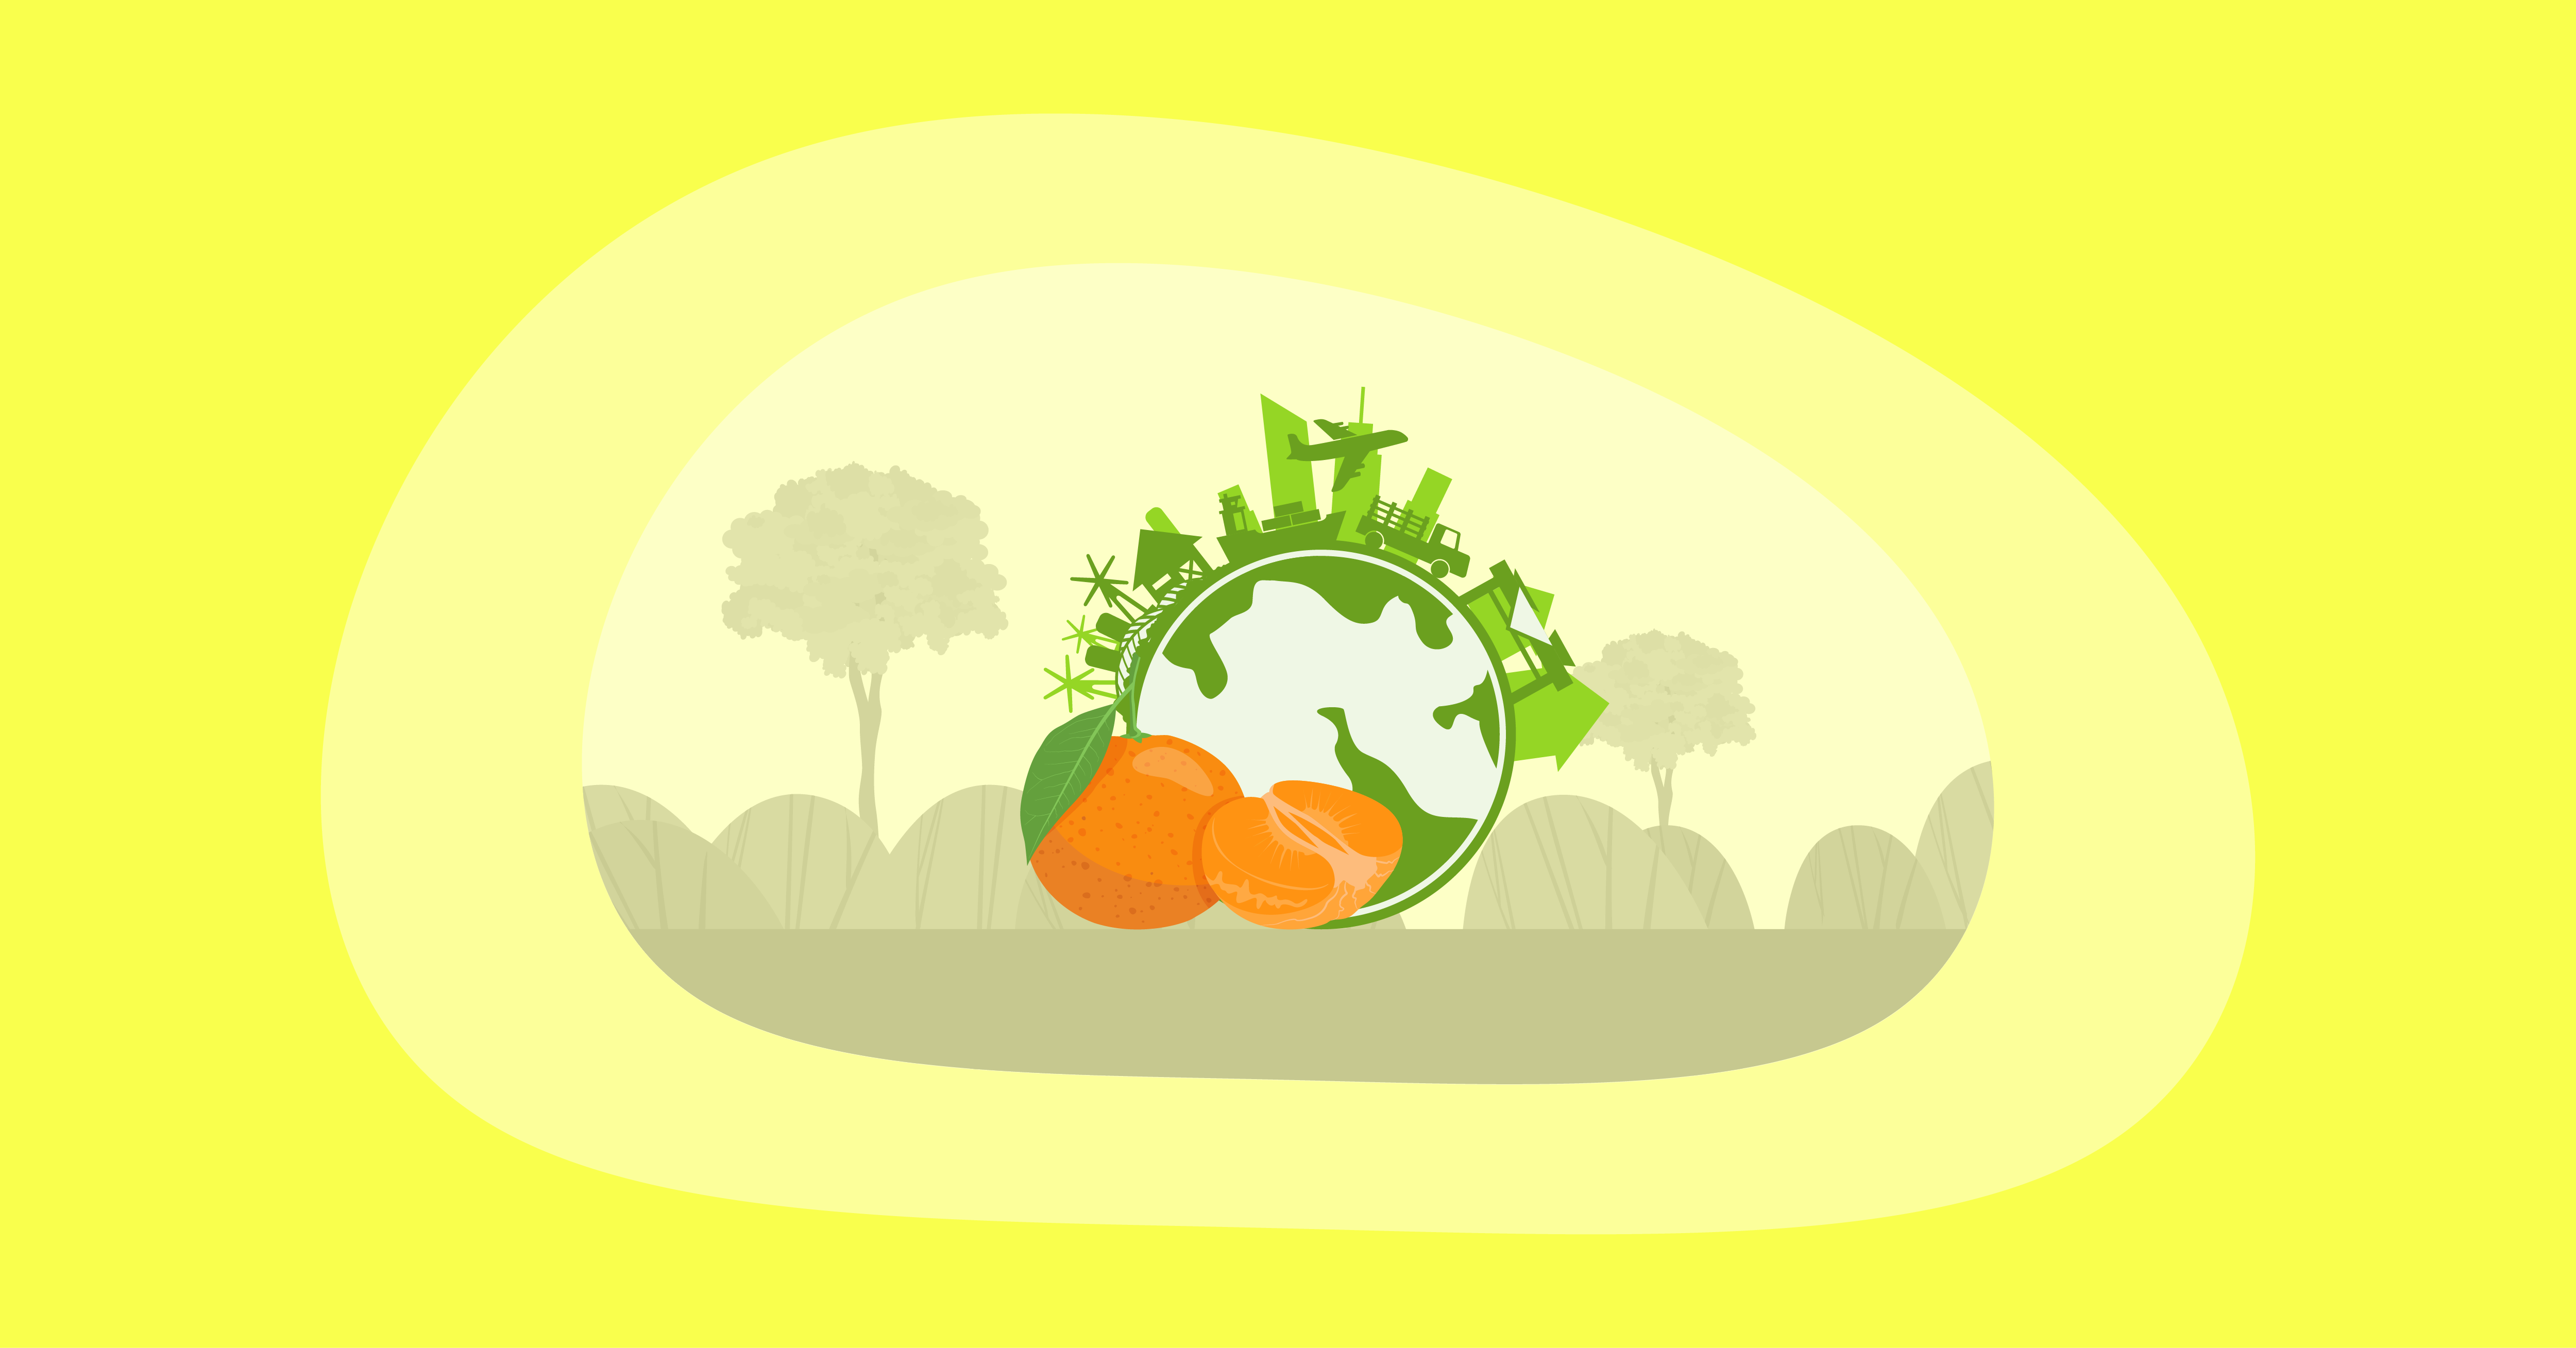 Illustration of clementines and their environmental impact